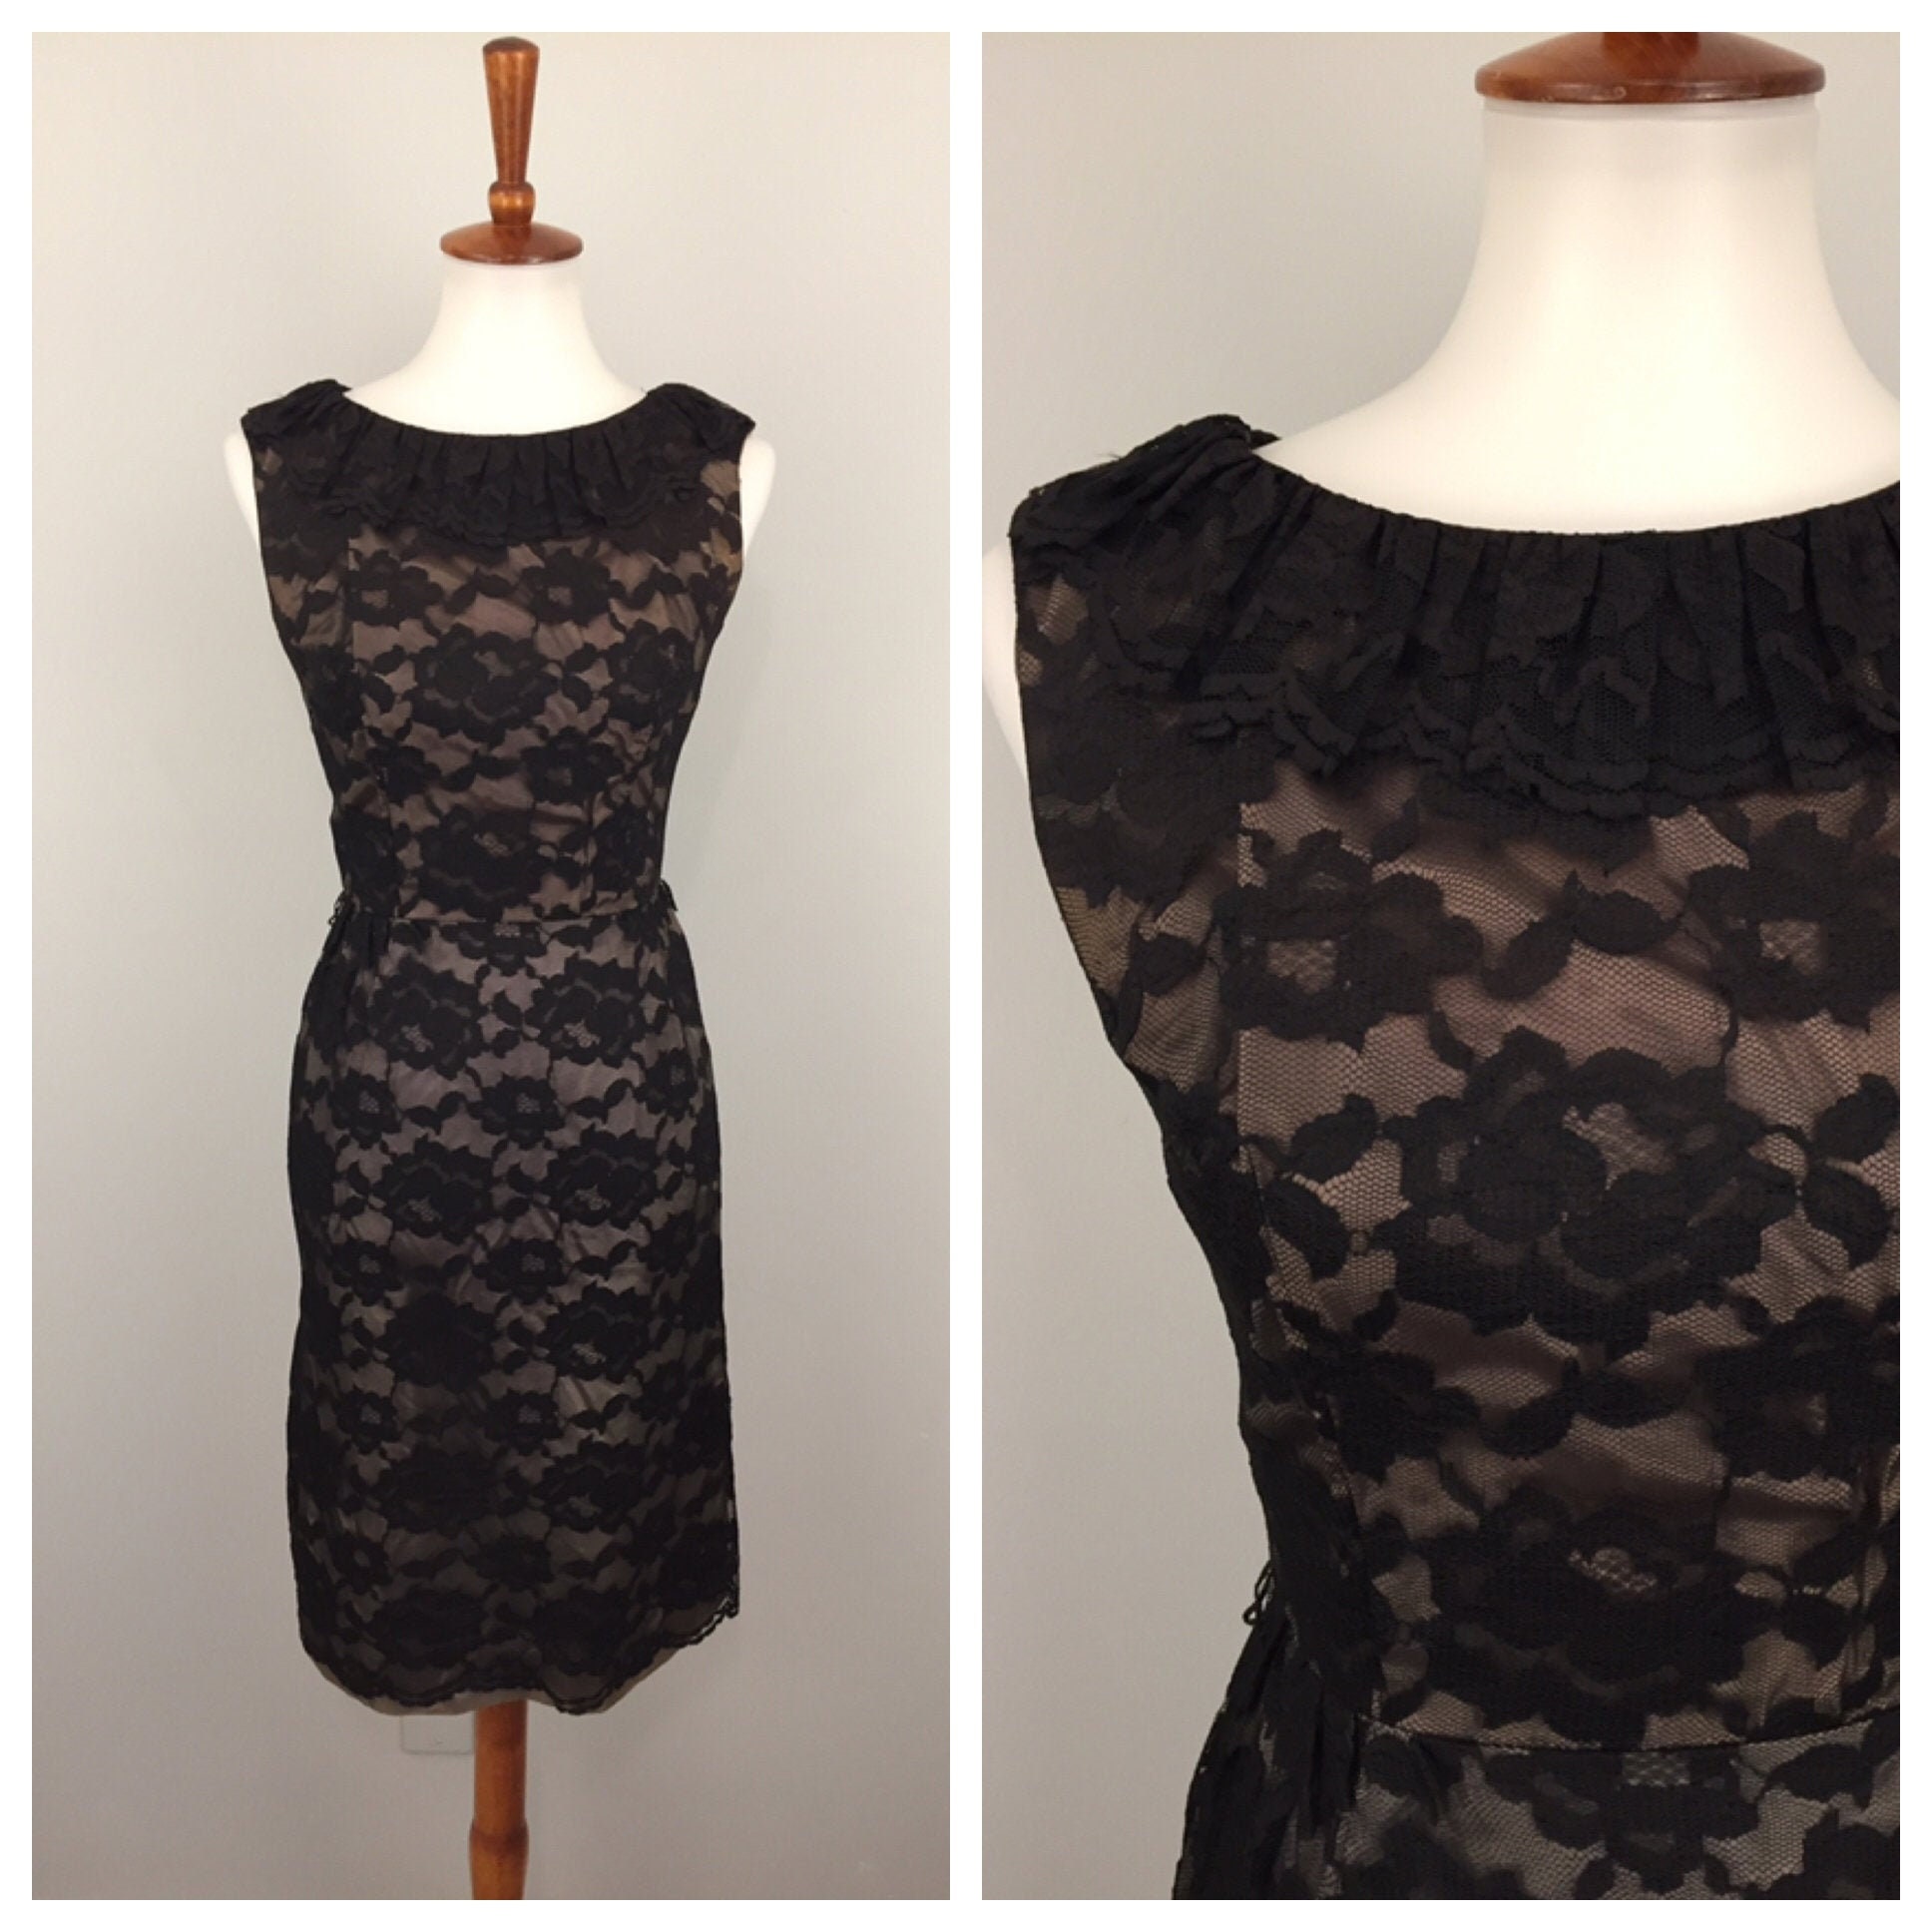 60s Cocktail Dress Black Lace Pink Bow